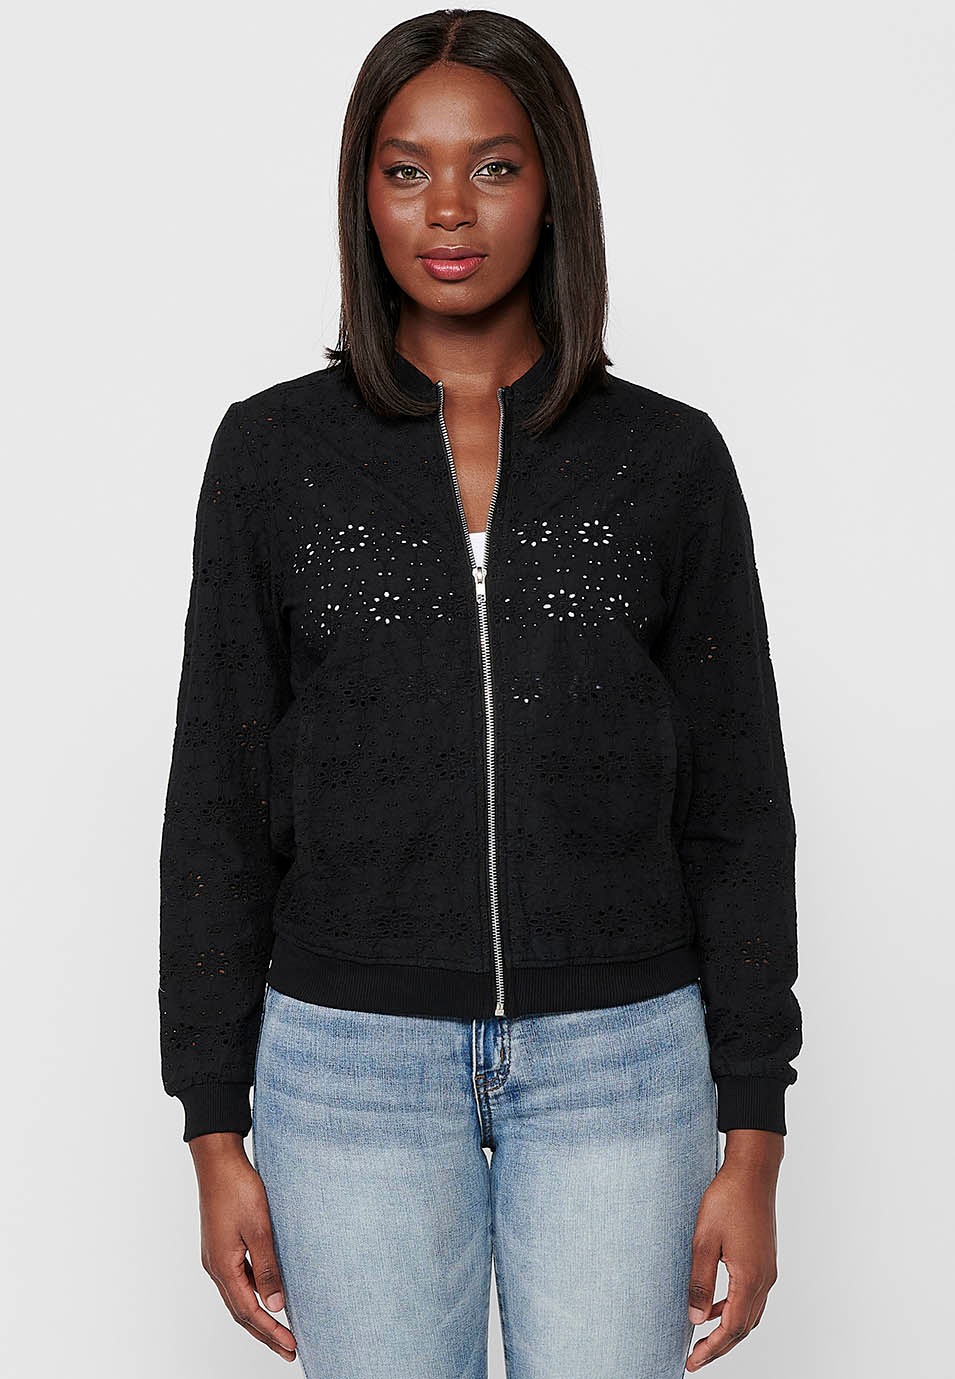 Cotton Sweatshirt with Zipper Front Closure and Rib Finishes with Embroidered Fabric with Floral Motifs and Black Round Neck for Women 1